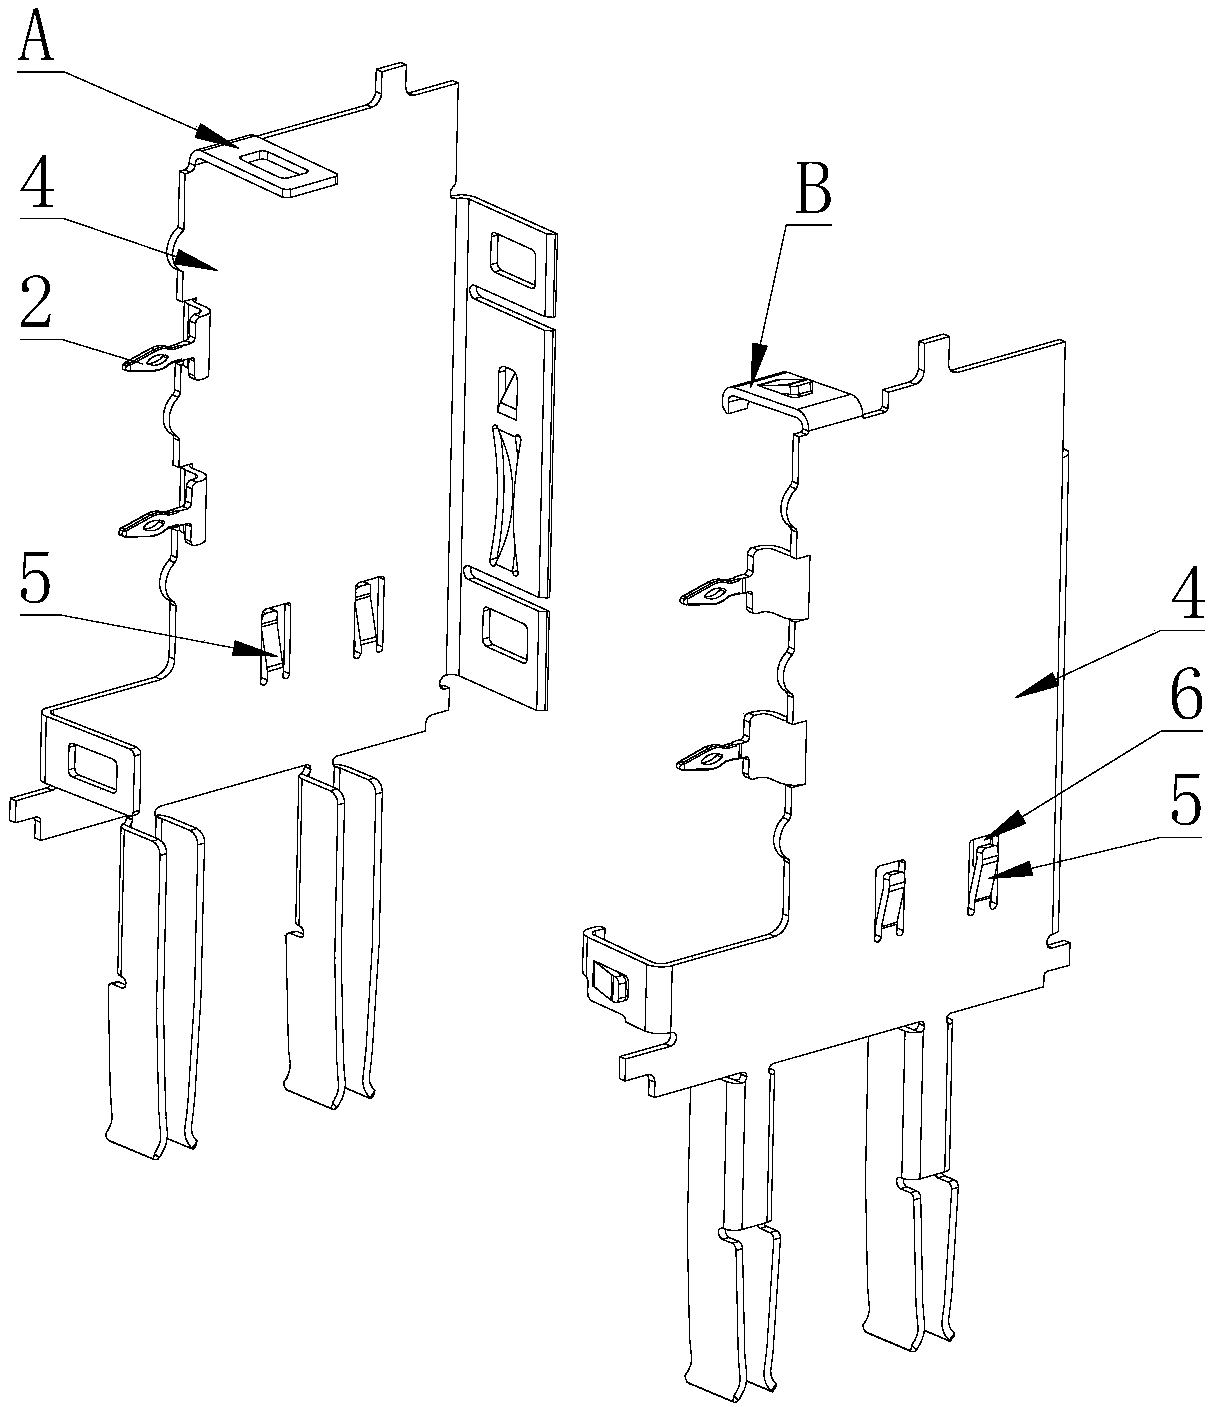 Series shielding type back board connector